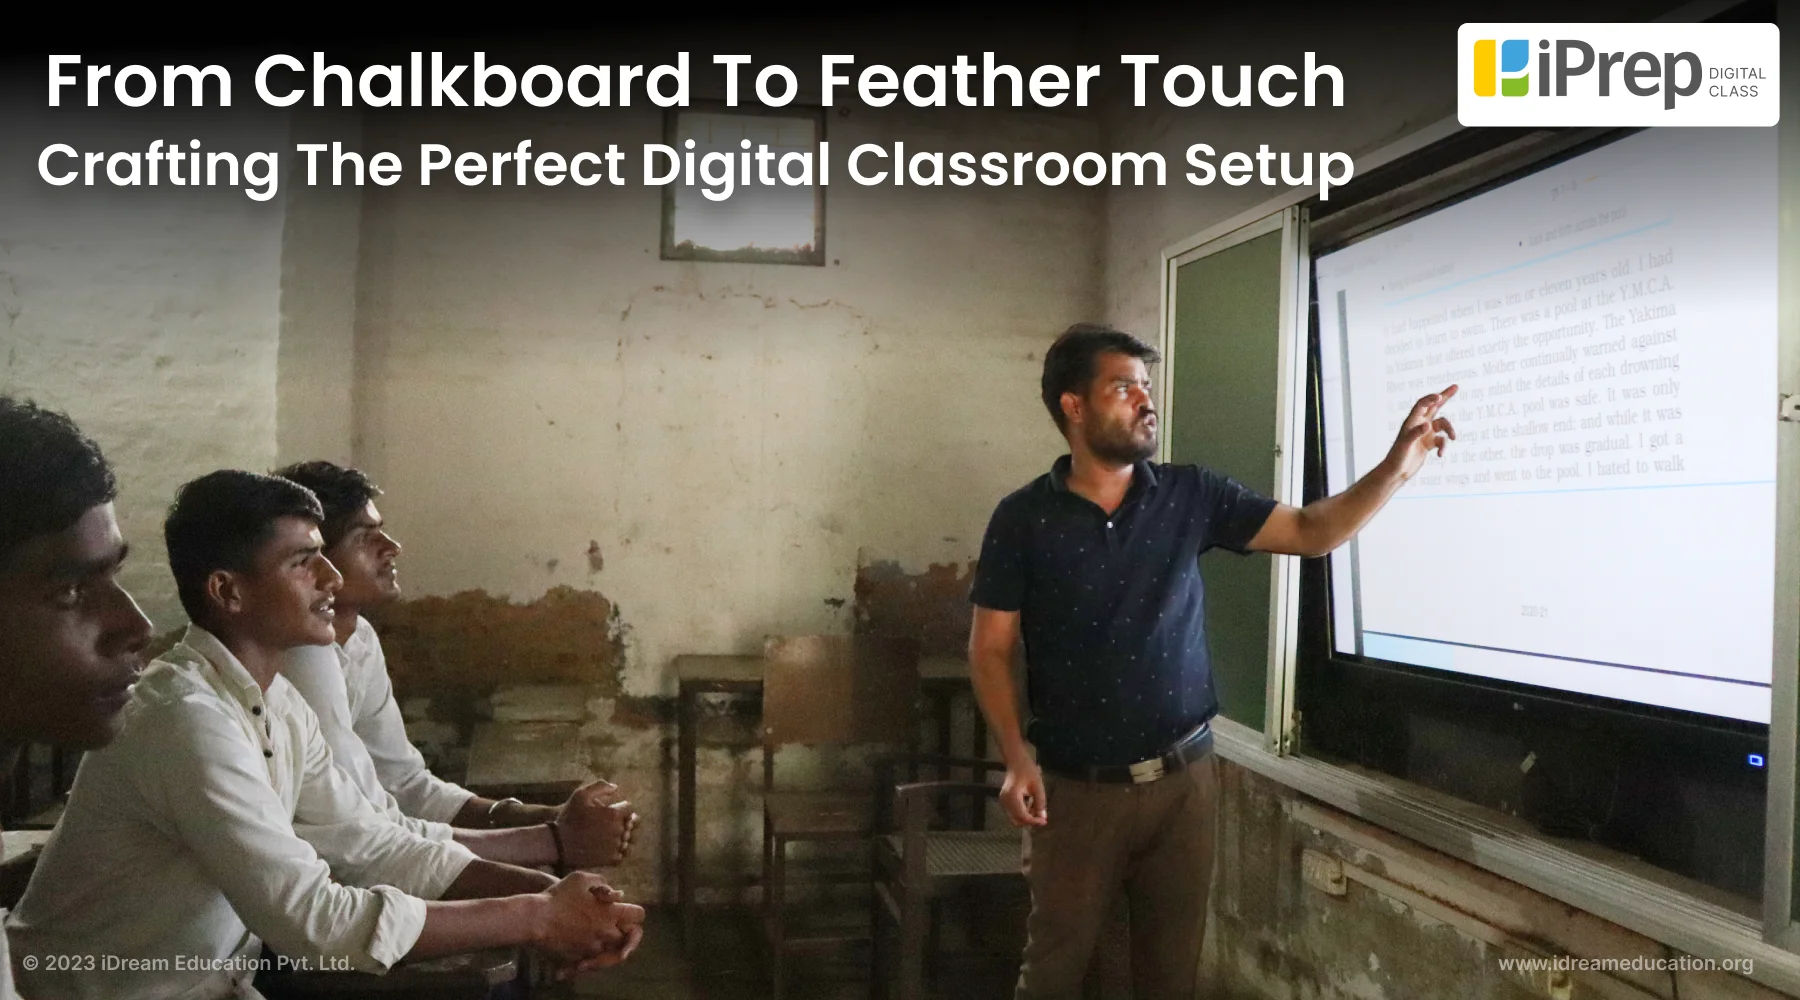 A visual of a shift from chalkboard to feather touch where a teacher using a digital classroom setup